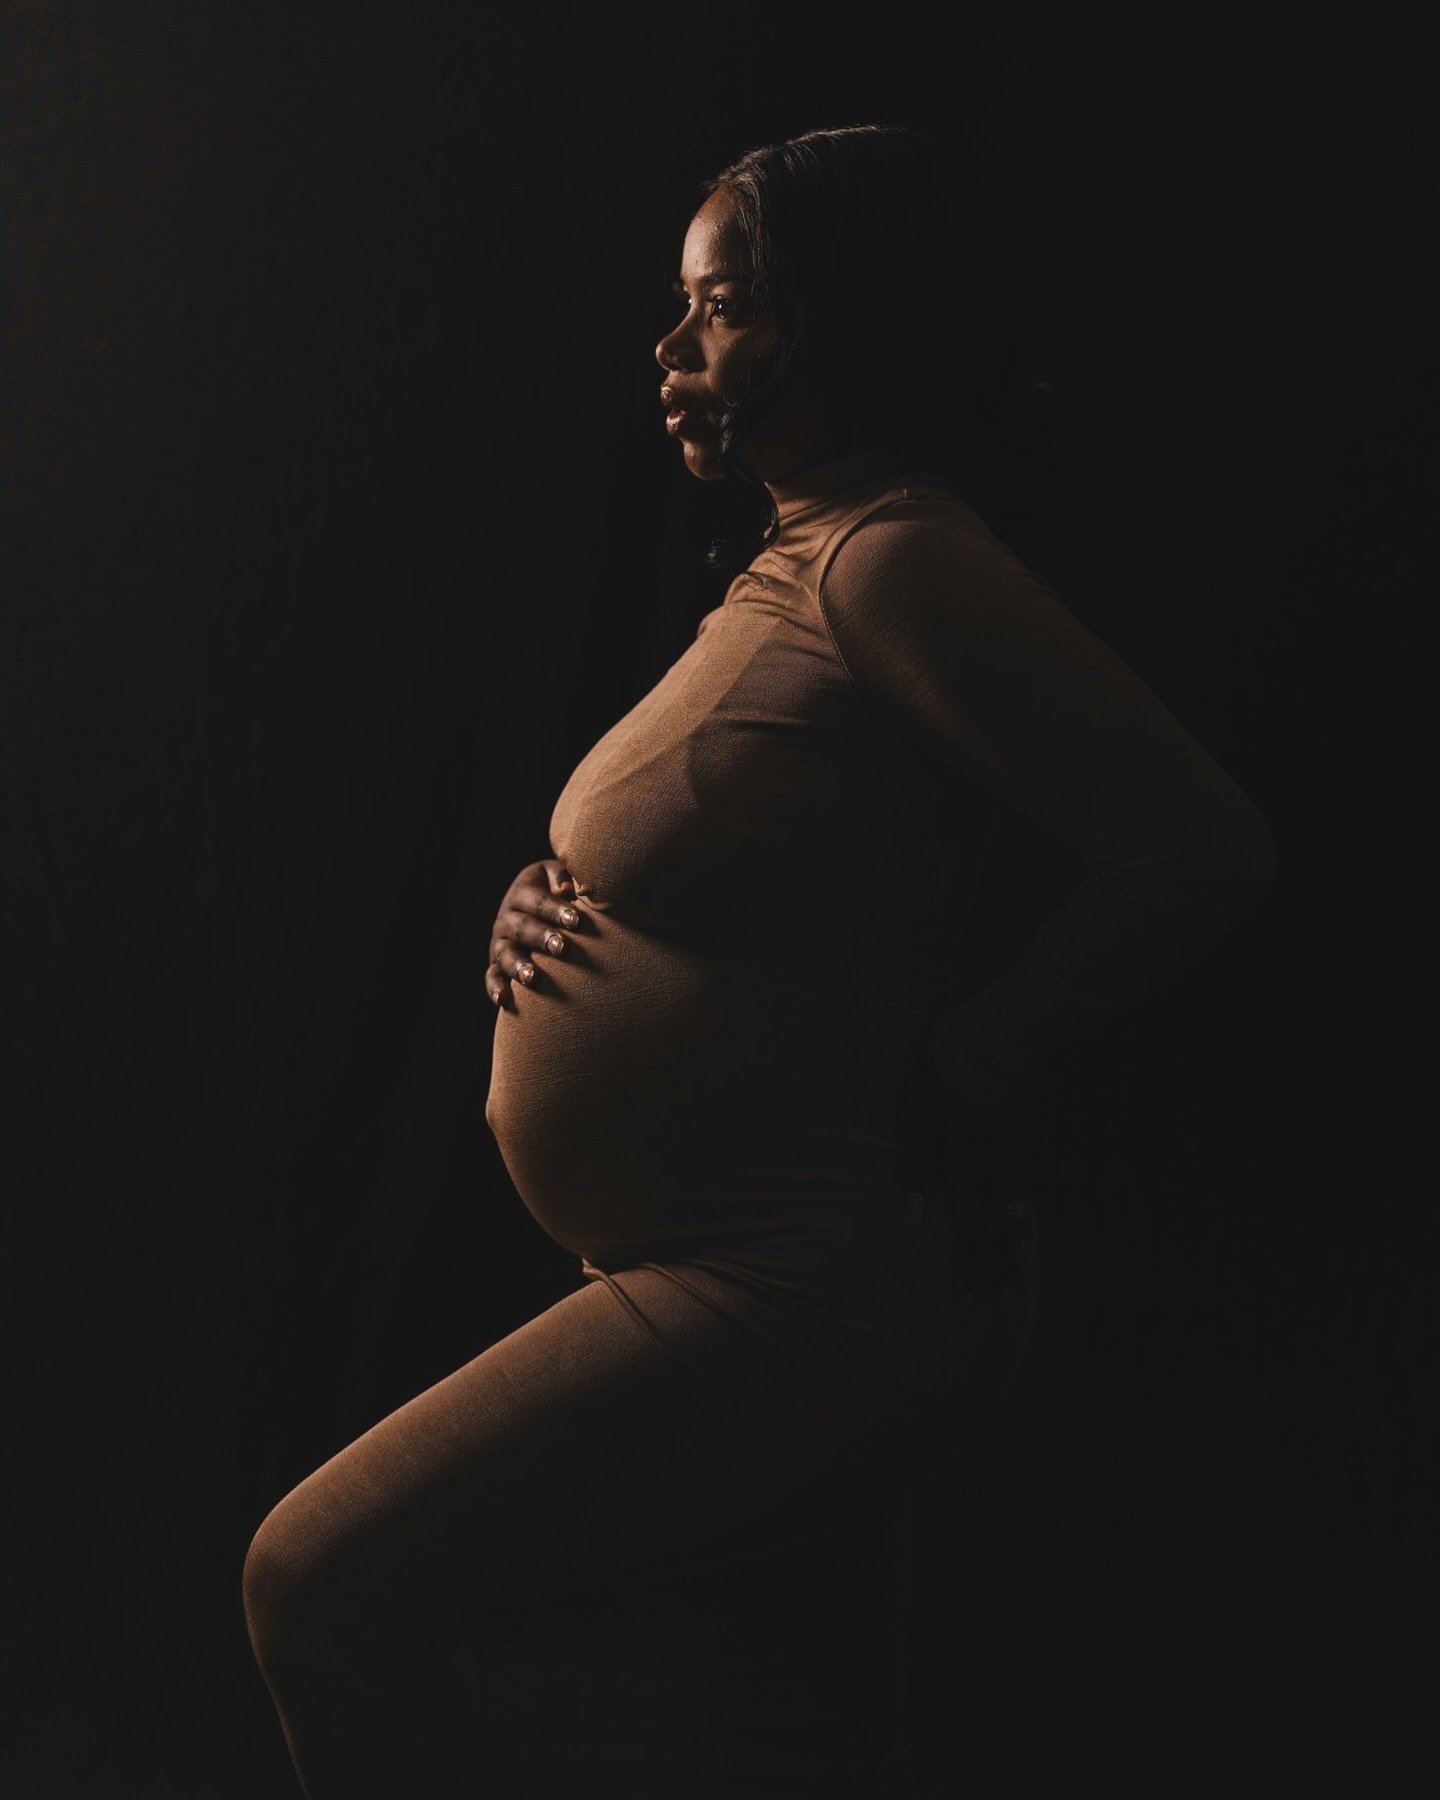 Happy Mother's Day to @magnifique.blessed I love watching your love story grow. #bestclients #mothersday #forevermyfavorite #studiophotography #maternity #maternityphotography